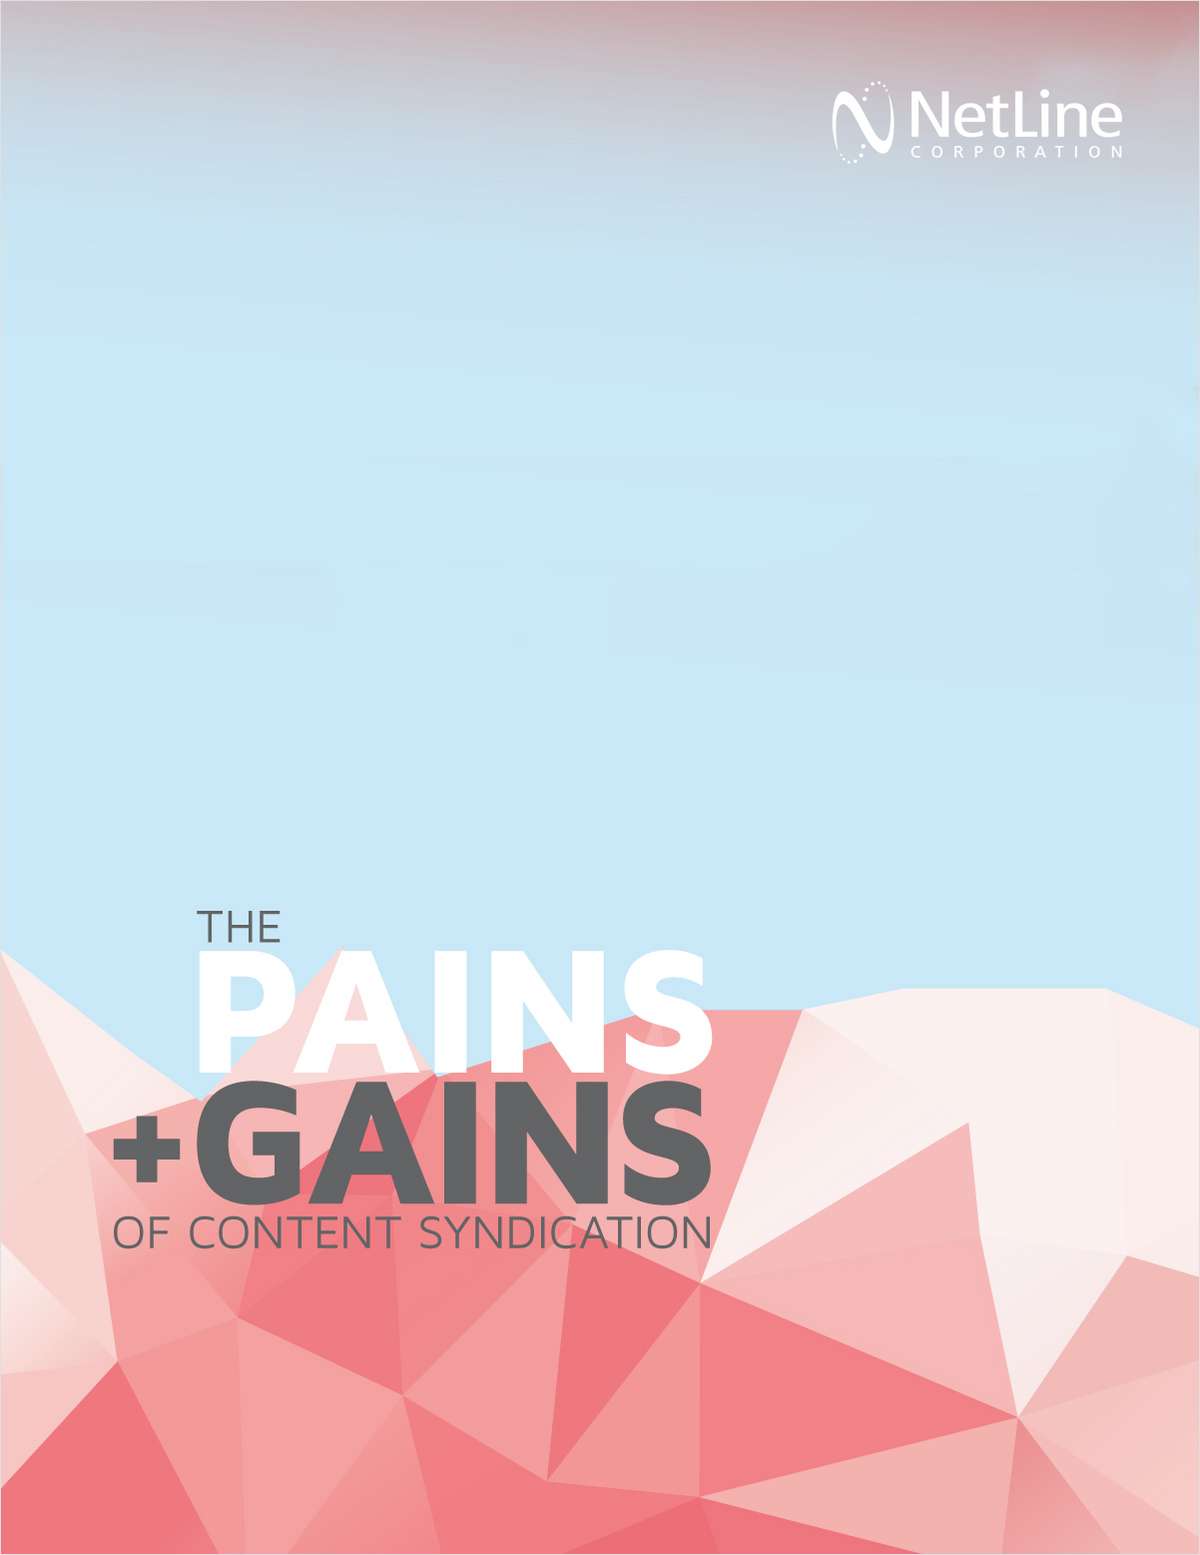 Pains & Gains of Content Syndication